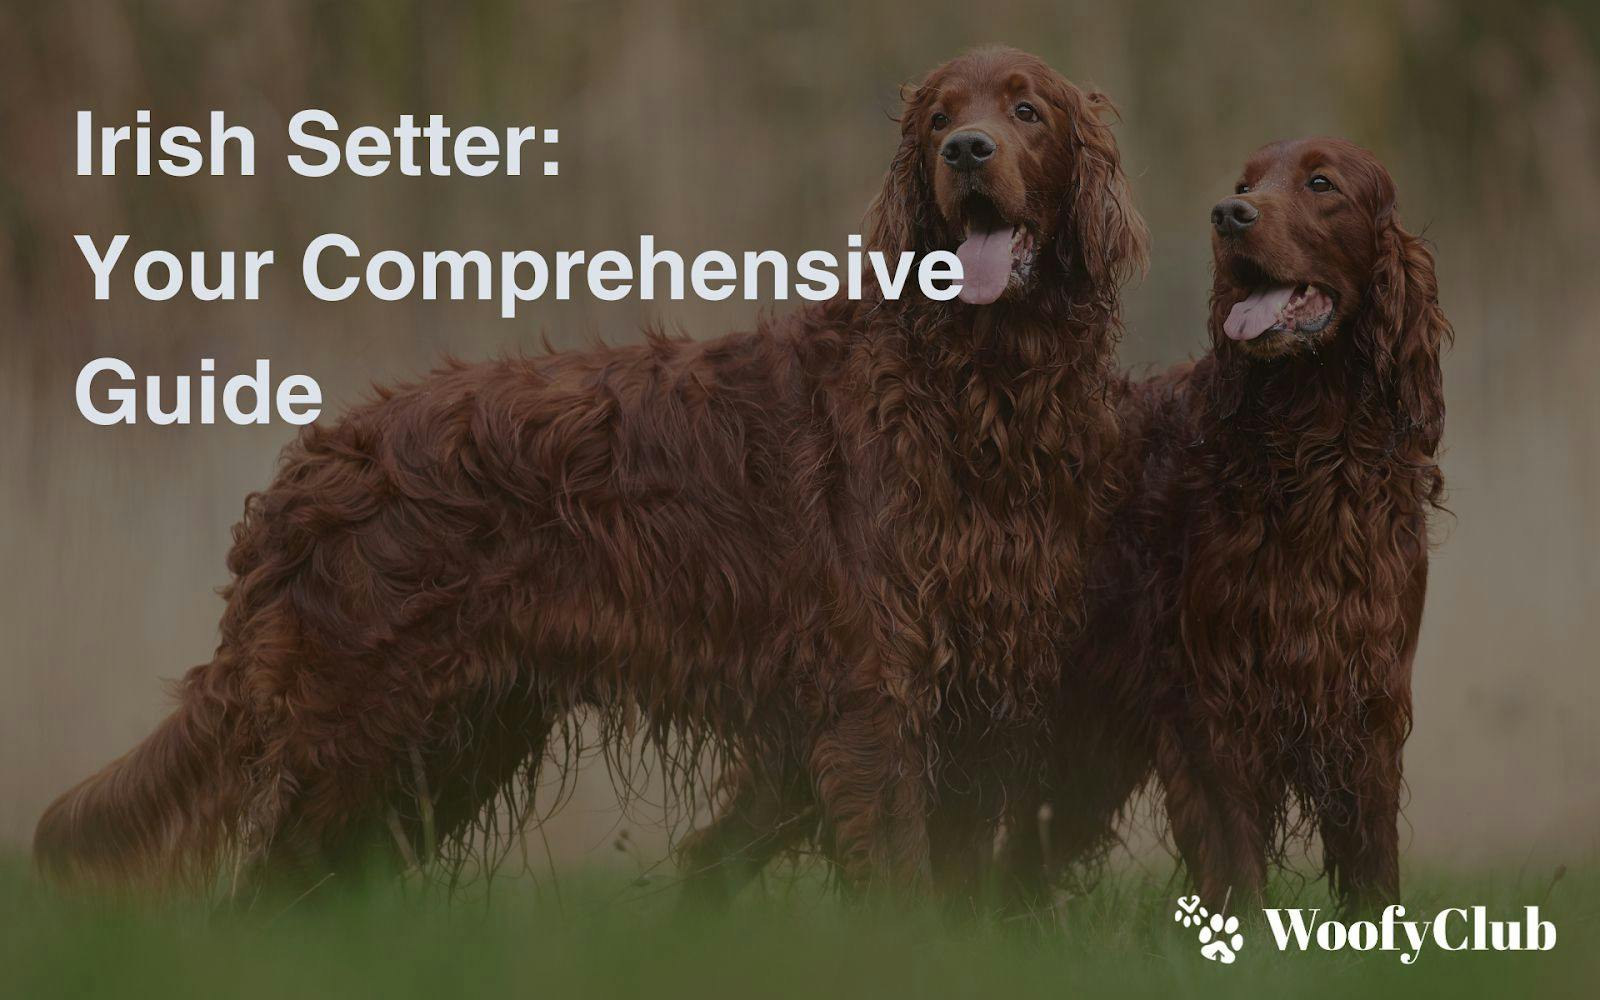 Irish Setter: Your Comprehensive Guide